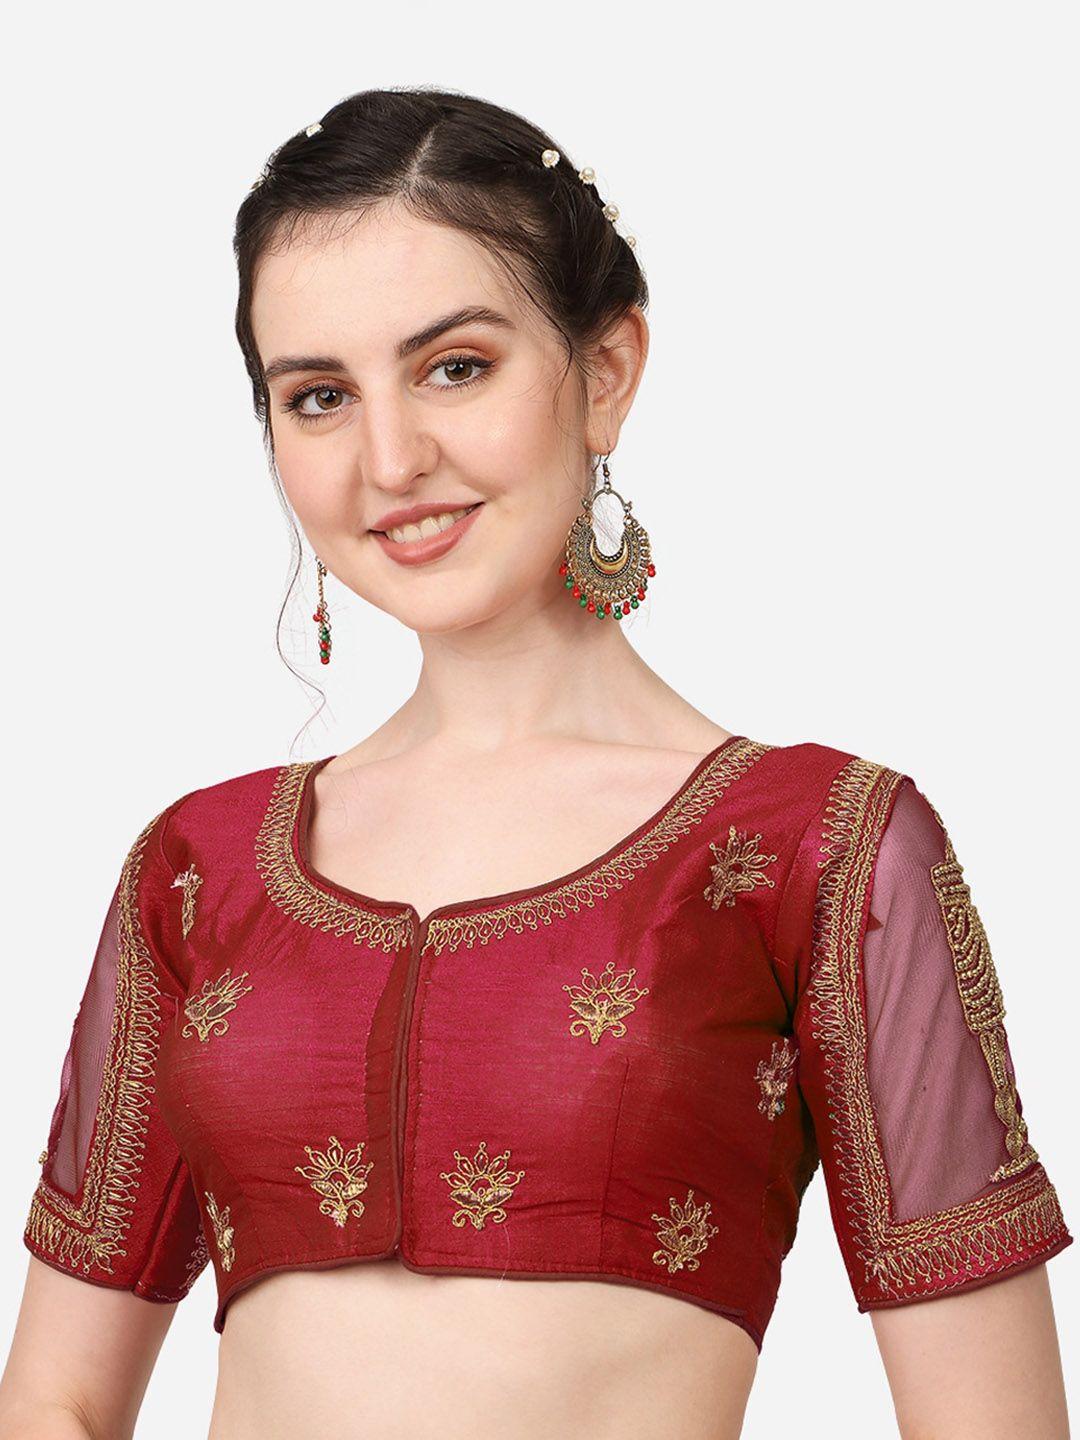 pujia mills maroon & gold-coloured embroidered saree blouse